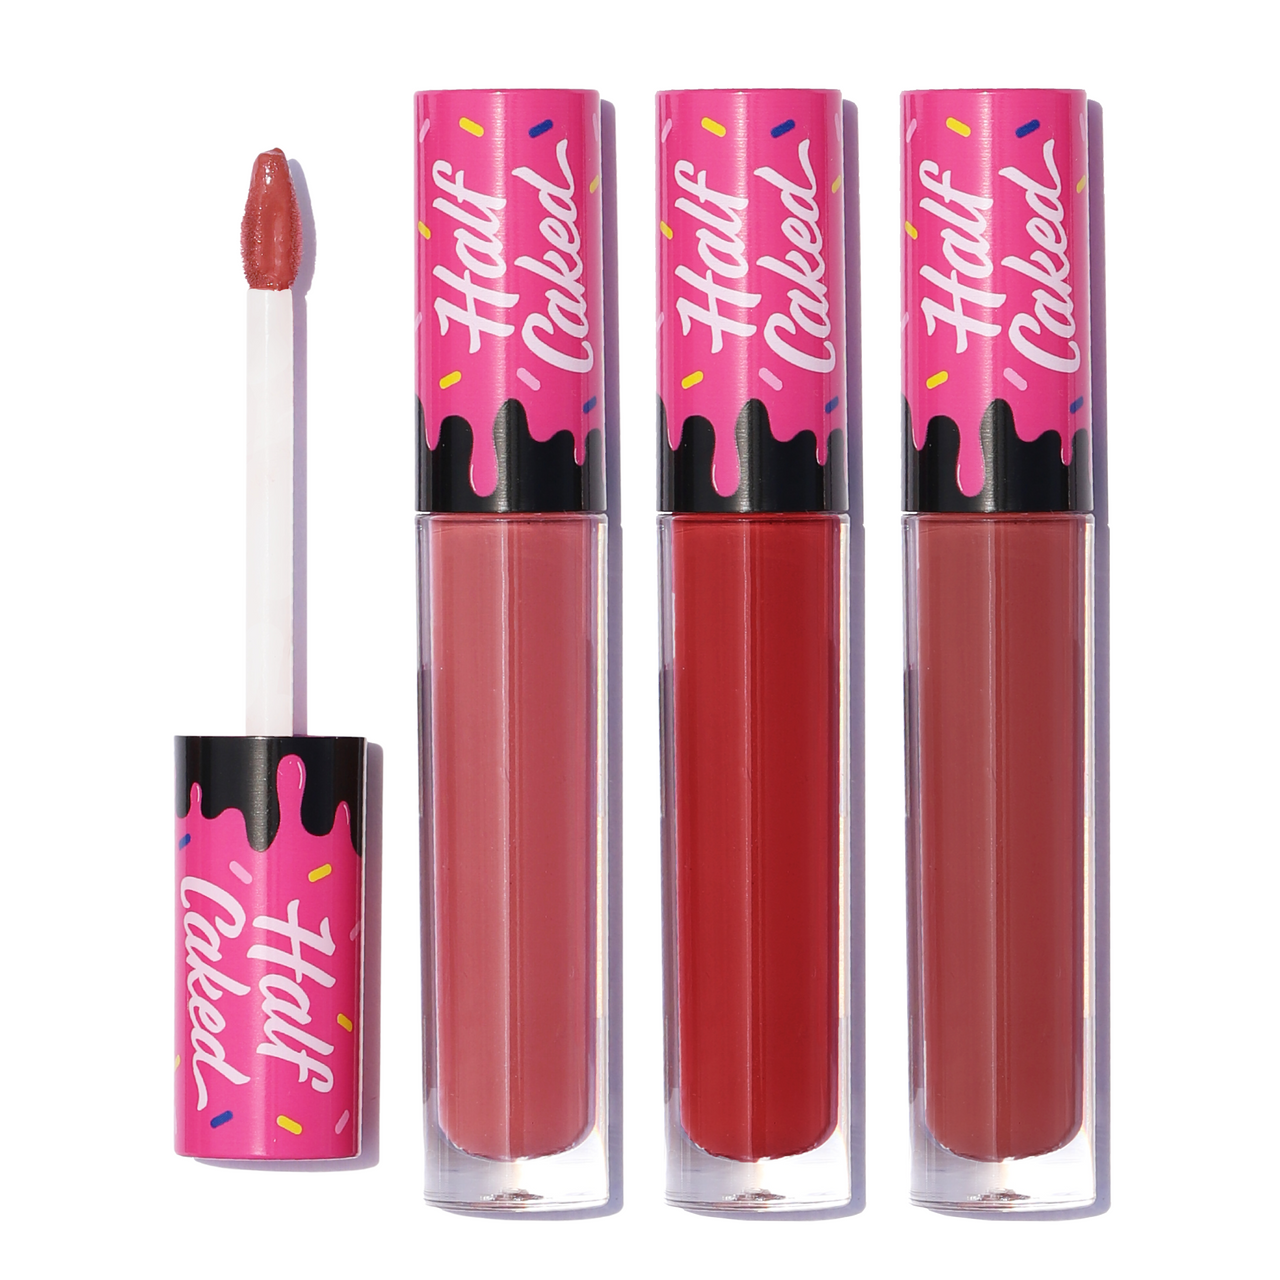 Game Changer Lip Fondant Trio by Half Caked, featuring three vibrant liquid lipsticks in a collector's edition playing card box, with one lipstick applicator open.